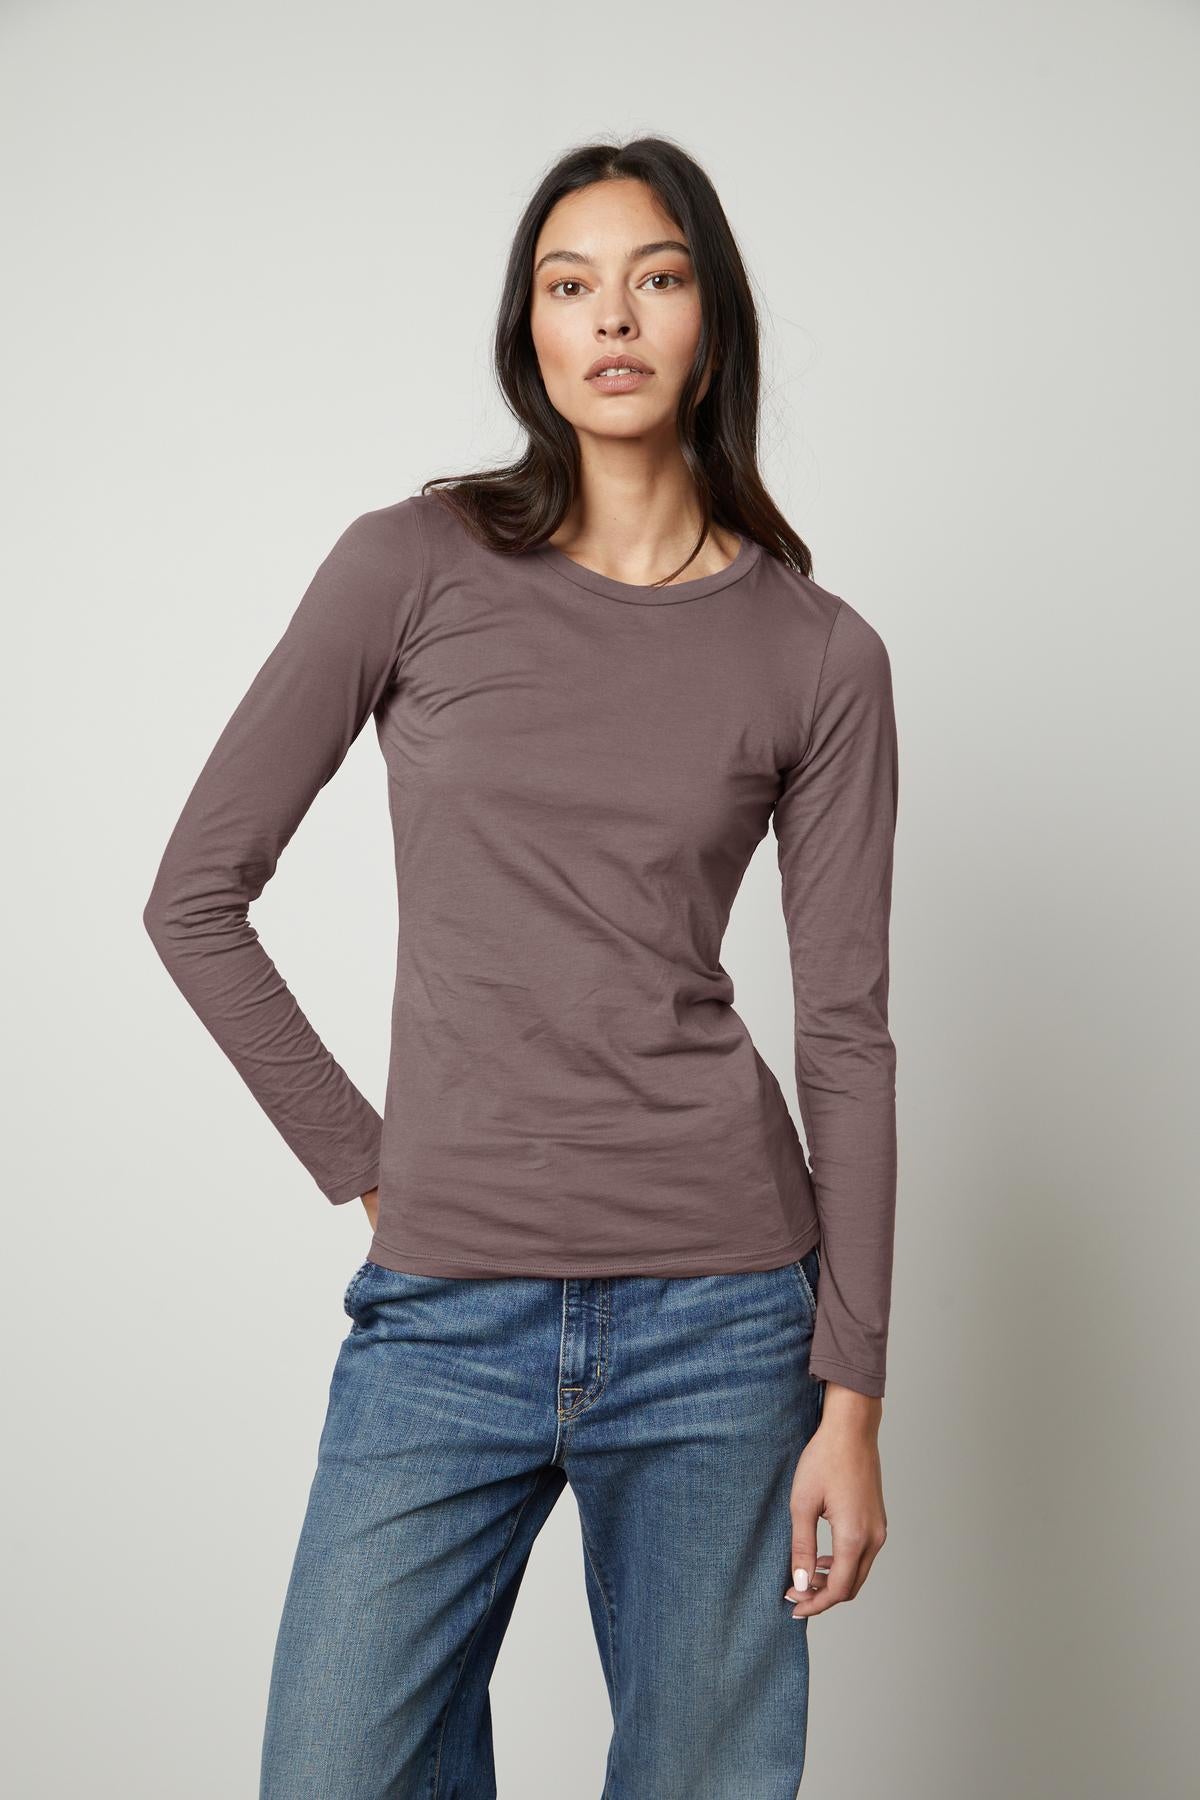 The ZOFINA GAUZY WHISPER FITTED CREW NECK TEE in a dark brown color is made of soft cotton by Velvet by Graham & Spencer.-35503498920129